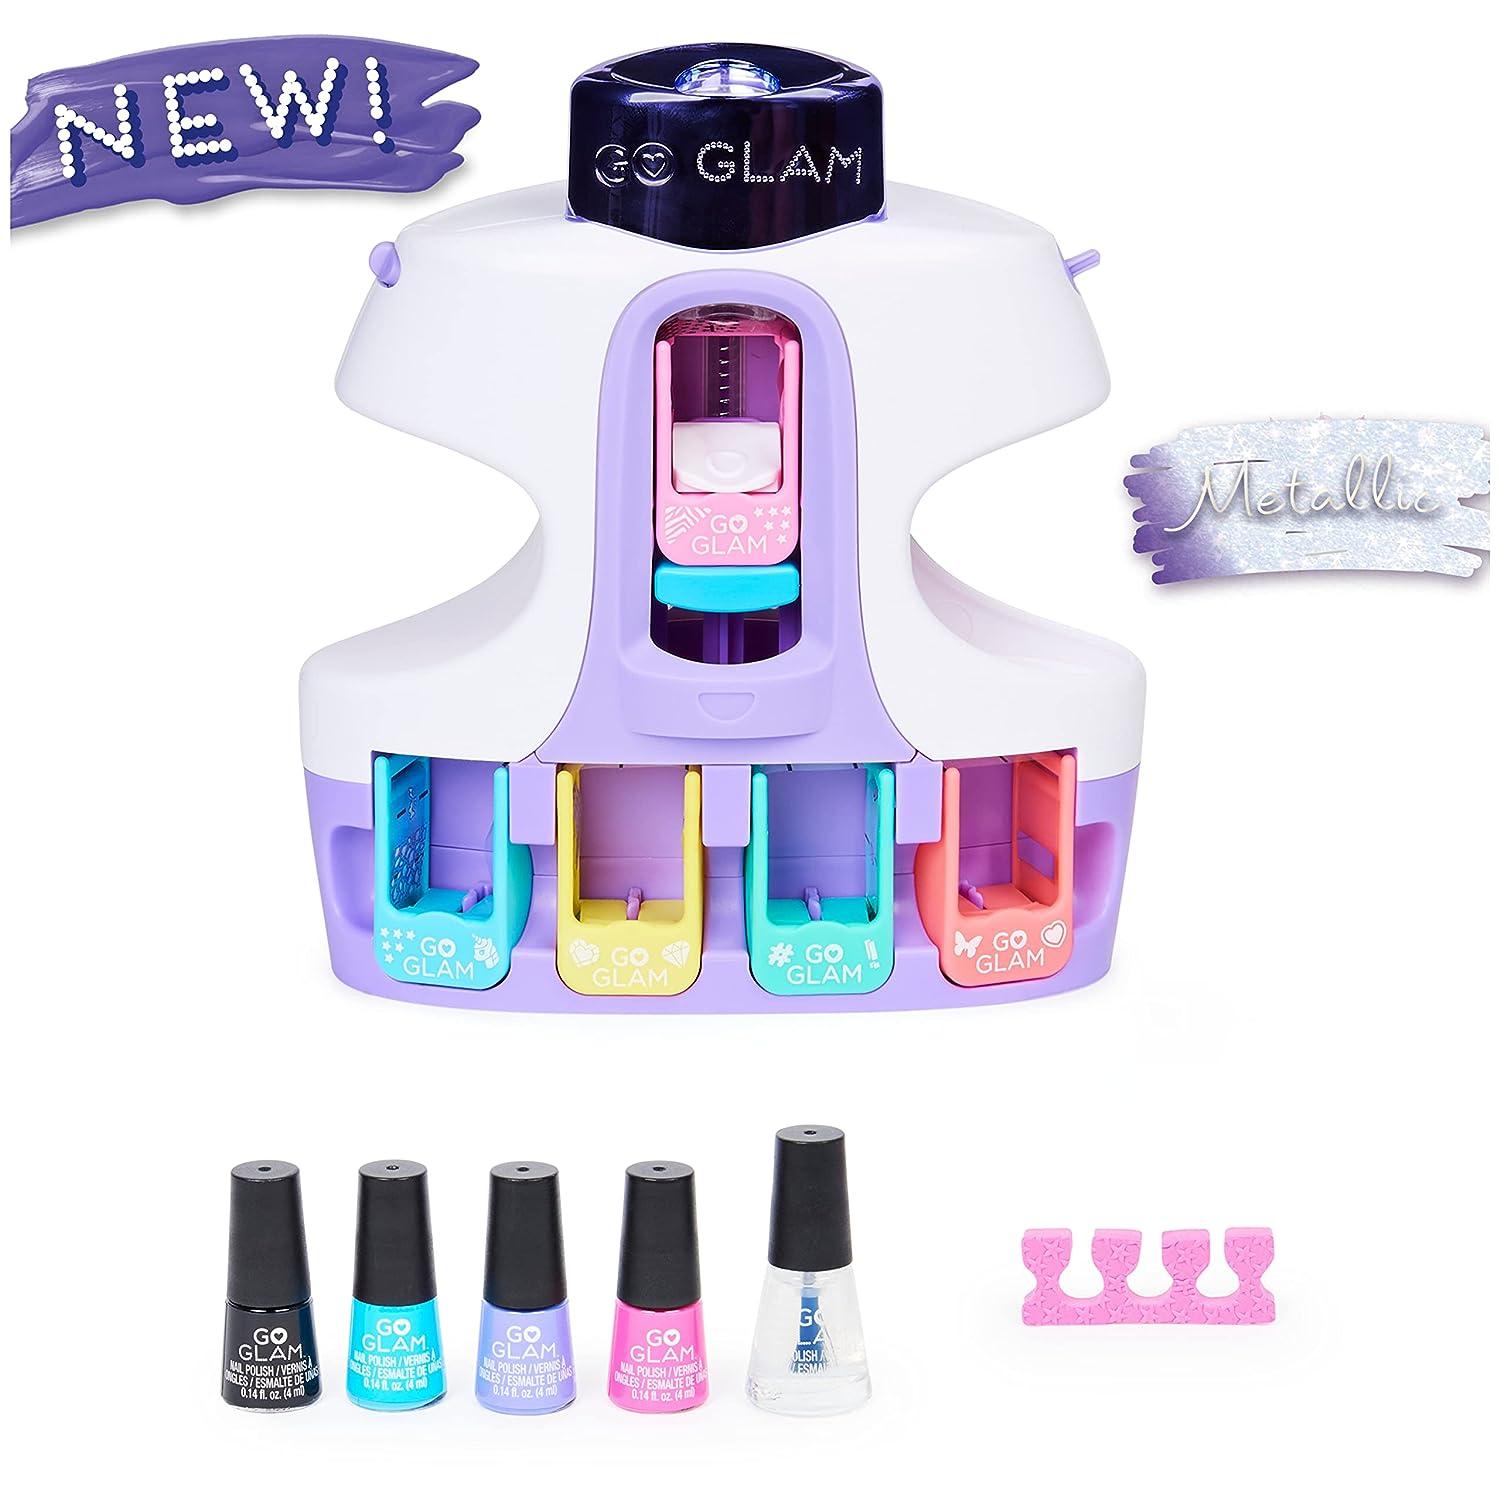 Cool Maker, GO GLAM Nail Salon for Manicures and Pedicures with 5 Patterns  and Nail Dryer